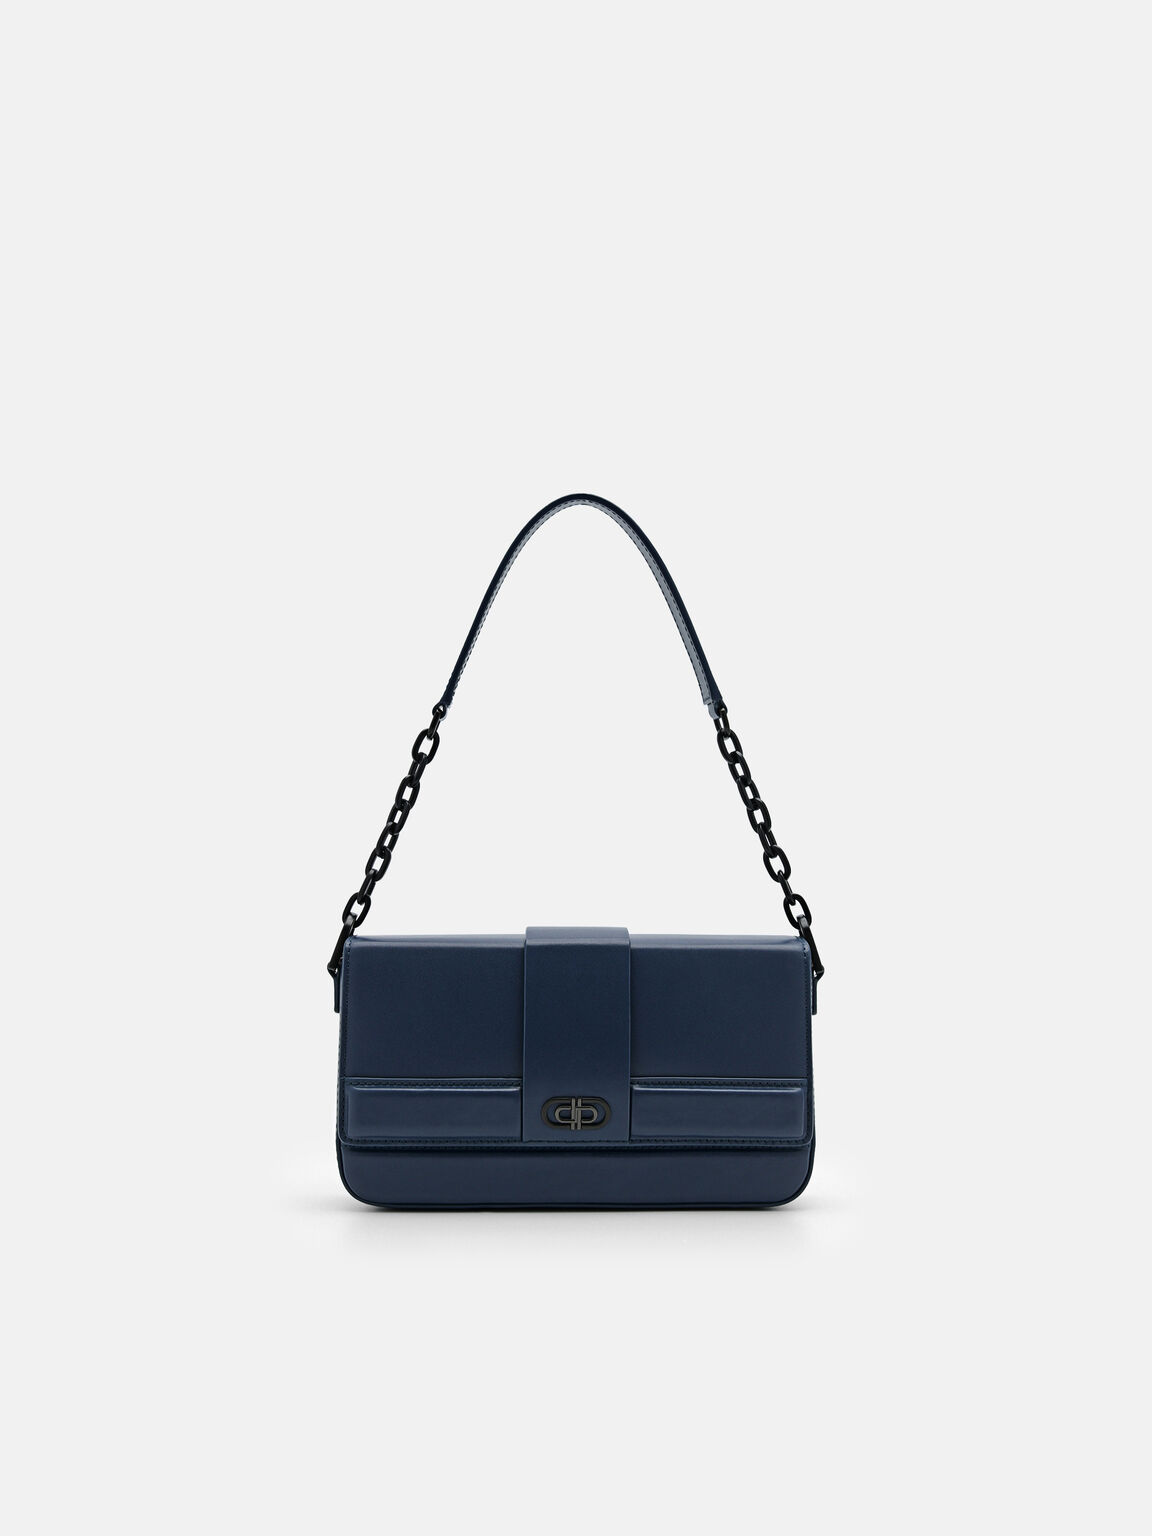 PEDRO Icon Leather Sling Bag, Navy, hi-res